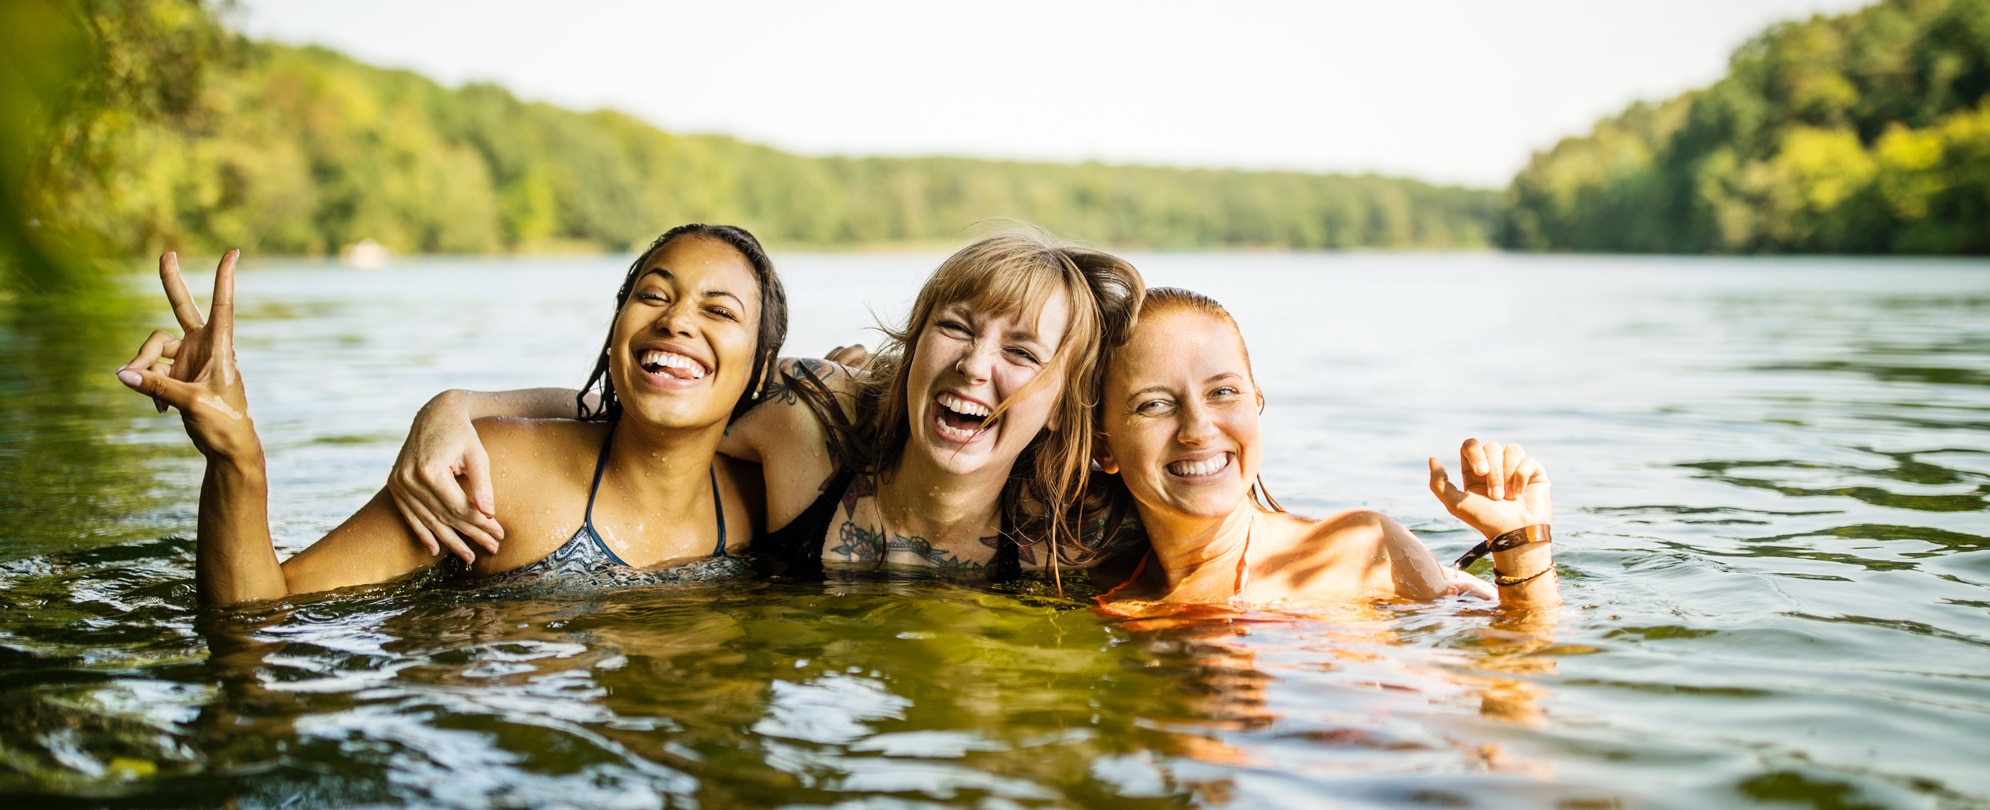 A group of three girlfriends taking a fun photo together in the lake 